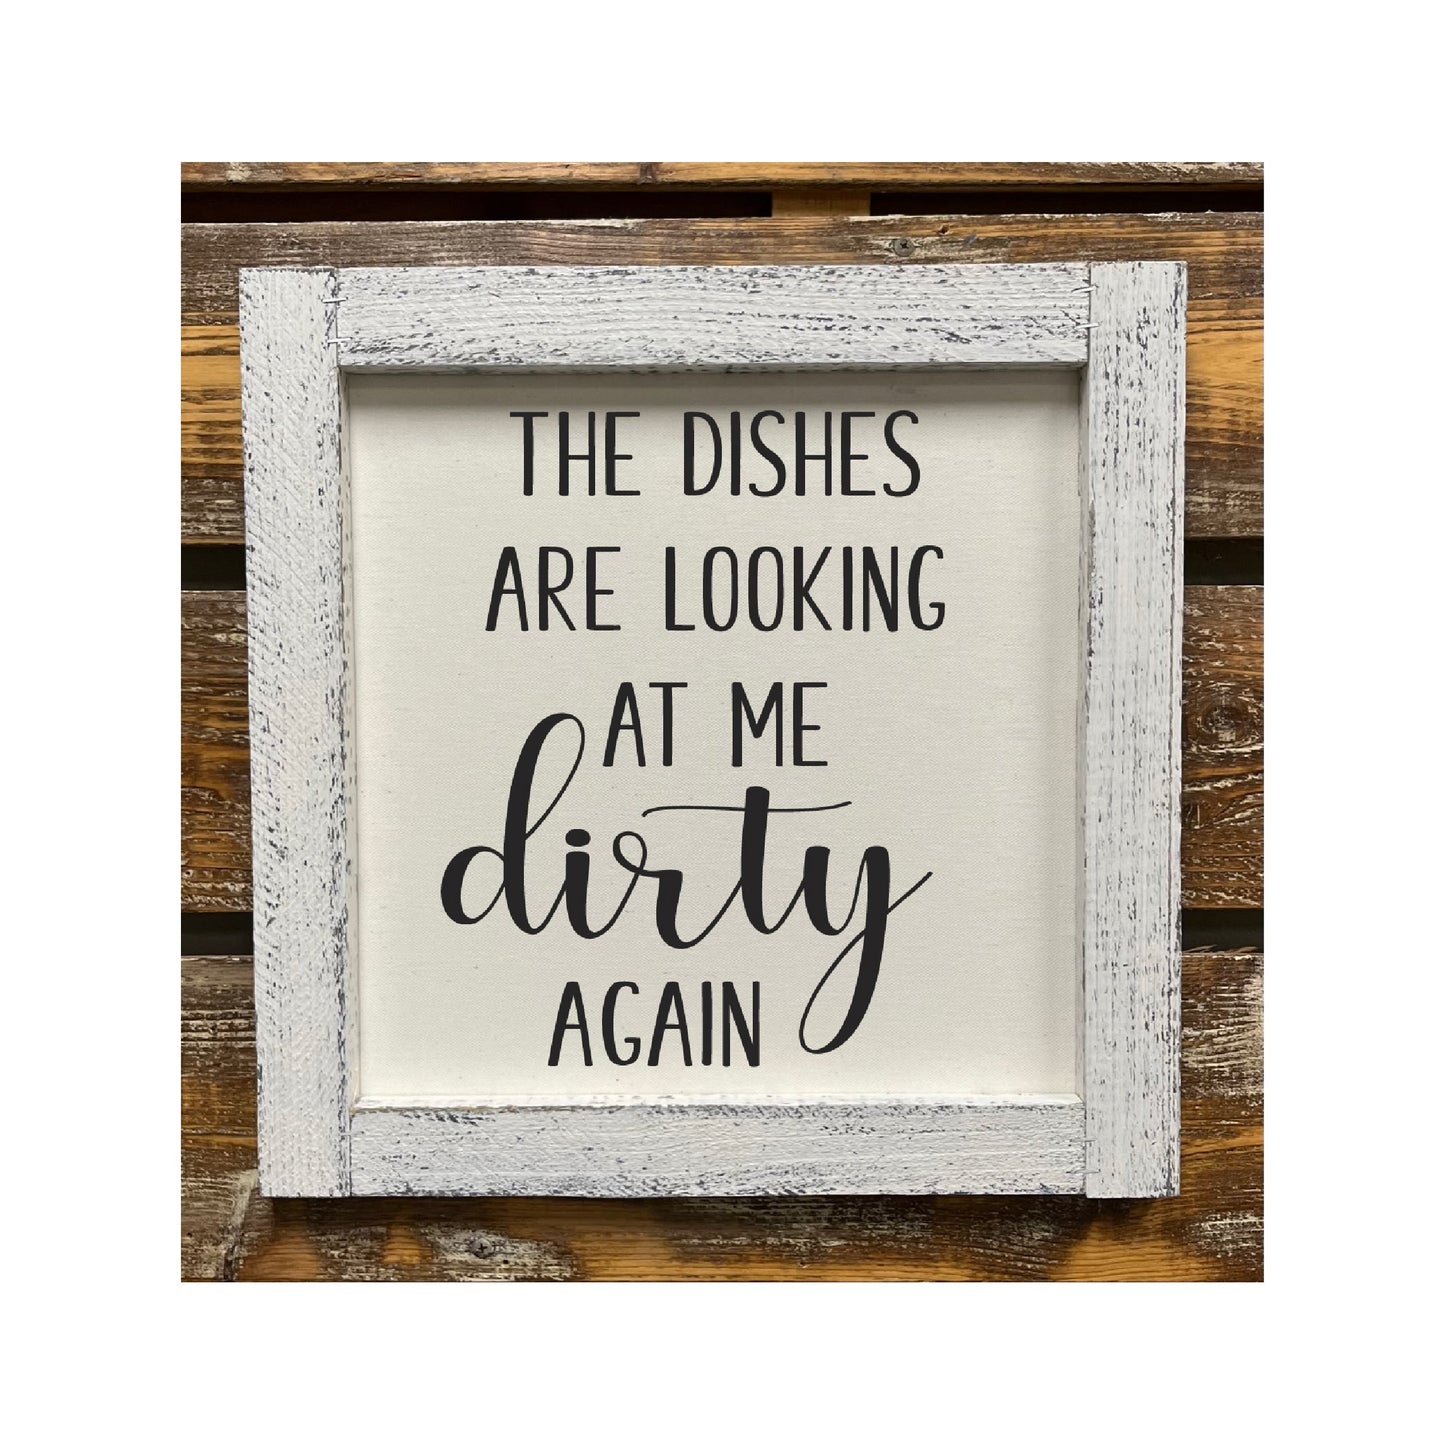 The Dishes Are Looking At Me Dirty Again